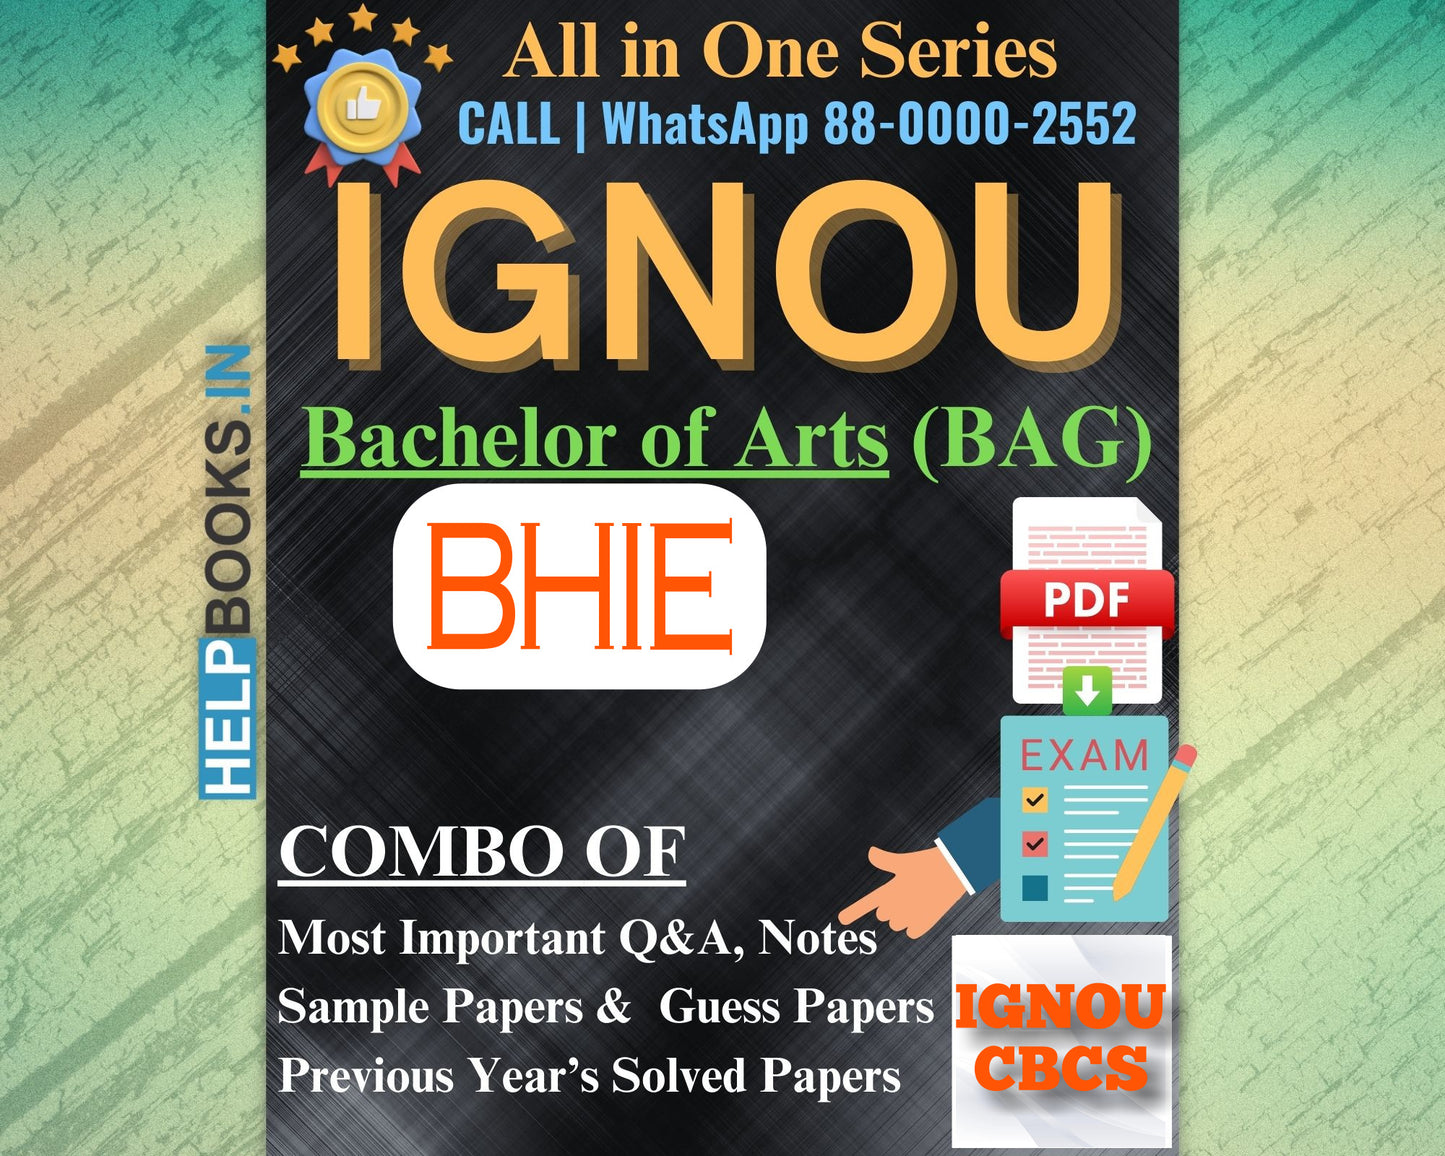 IGNOU BAG Online Study Package: Bachelor of Arts (BA) - Previous Years Solved Papers, Q&A, Exam Notes, Sample Papers, Guess Papers-BHIE141, BHIE142, BHIE143, BHIE144, BHIE145